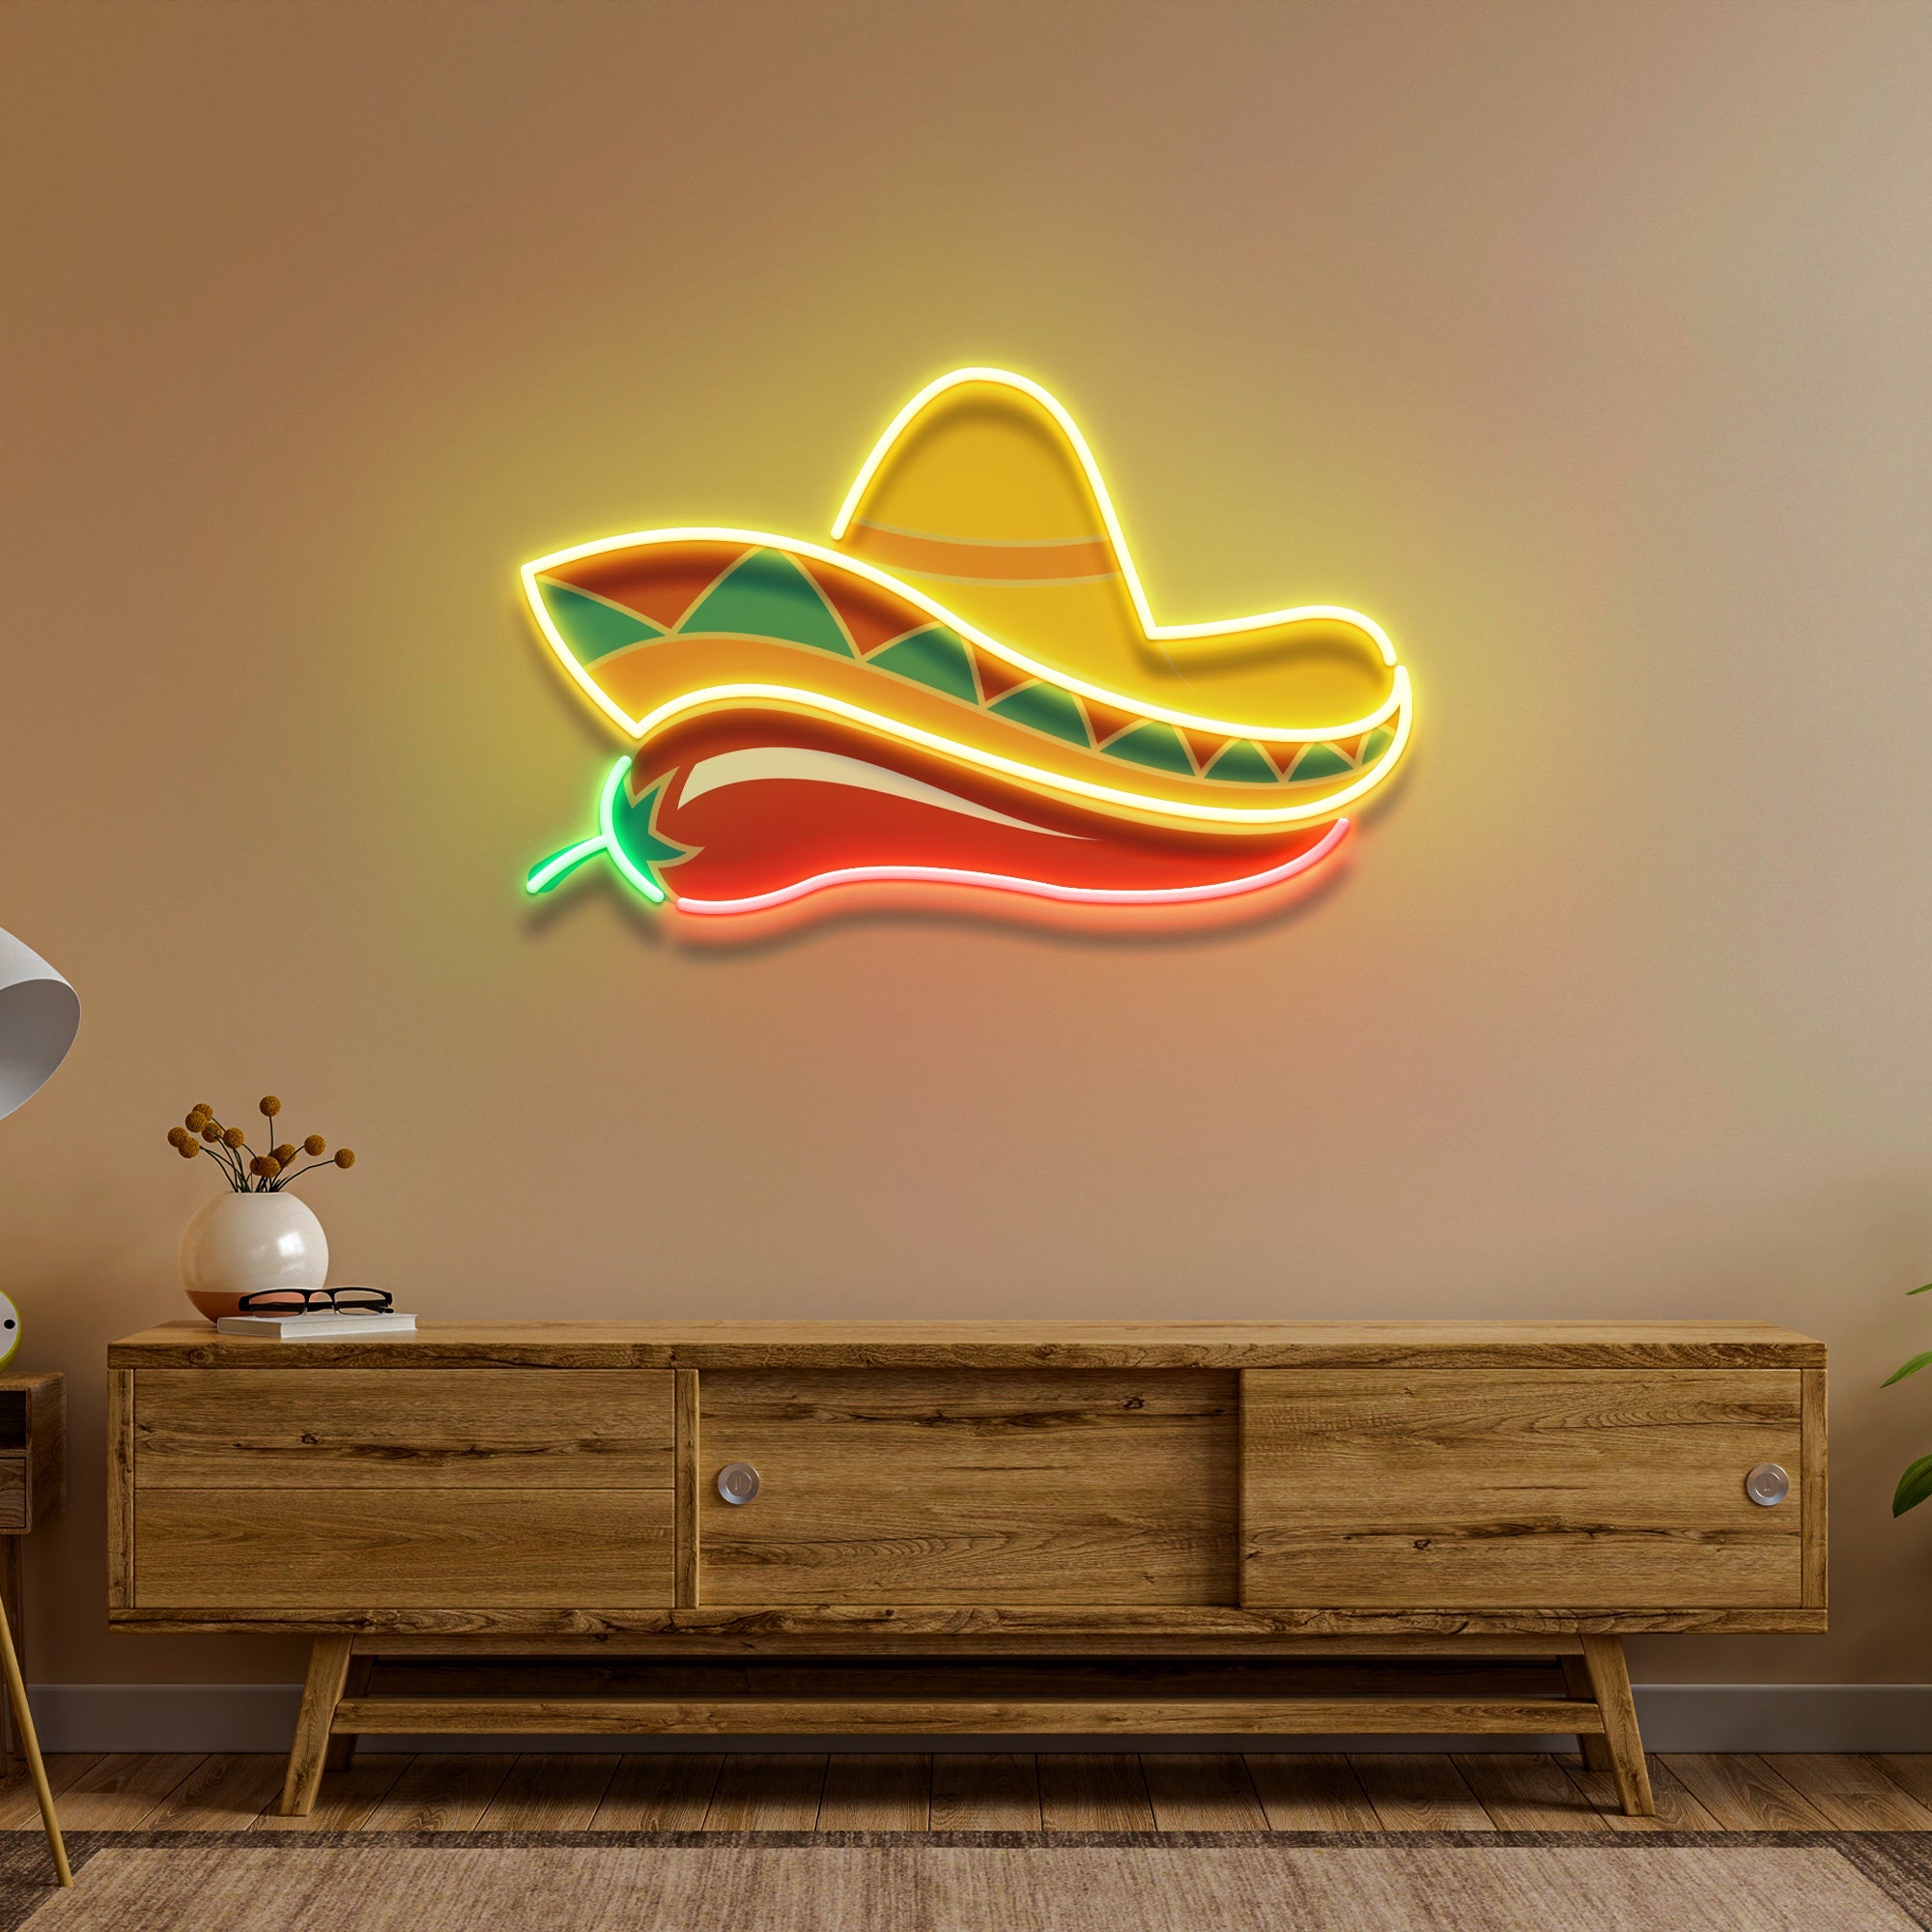 Mexican Sombrero Hat with Chili for Restaurant Artwork Led Neon Sign Light - Neonbir